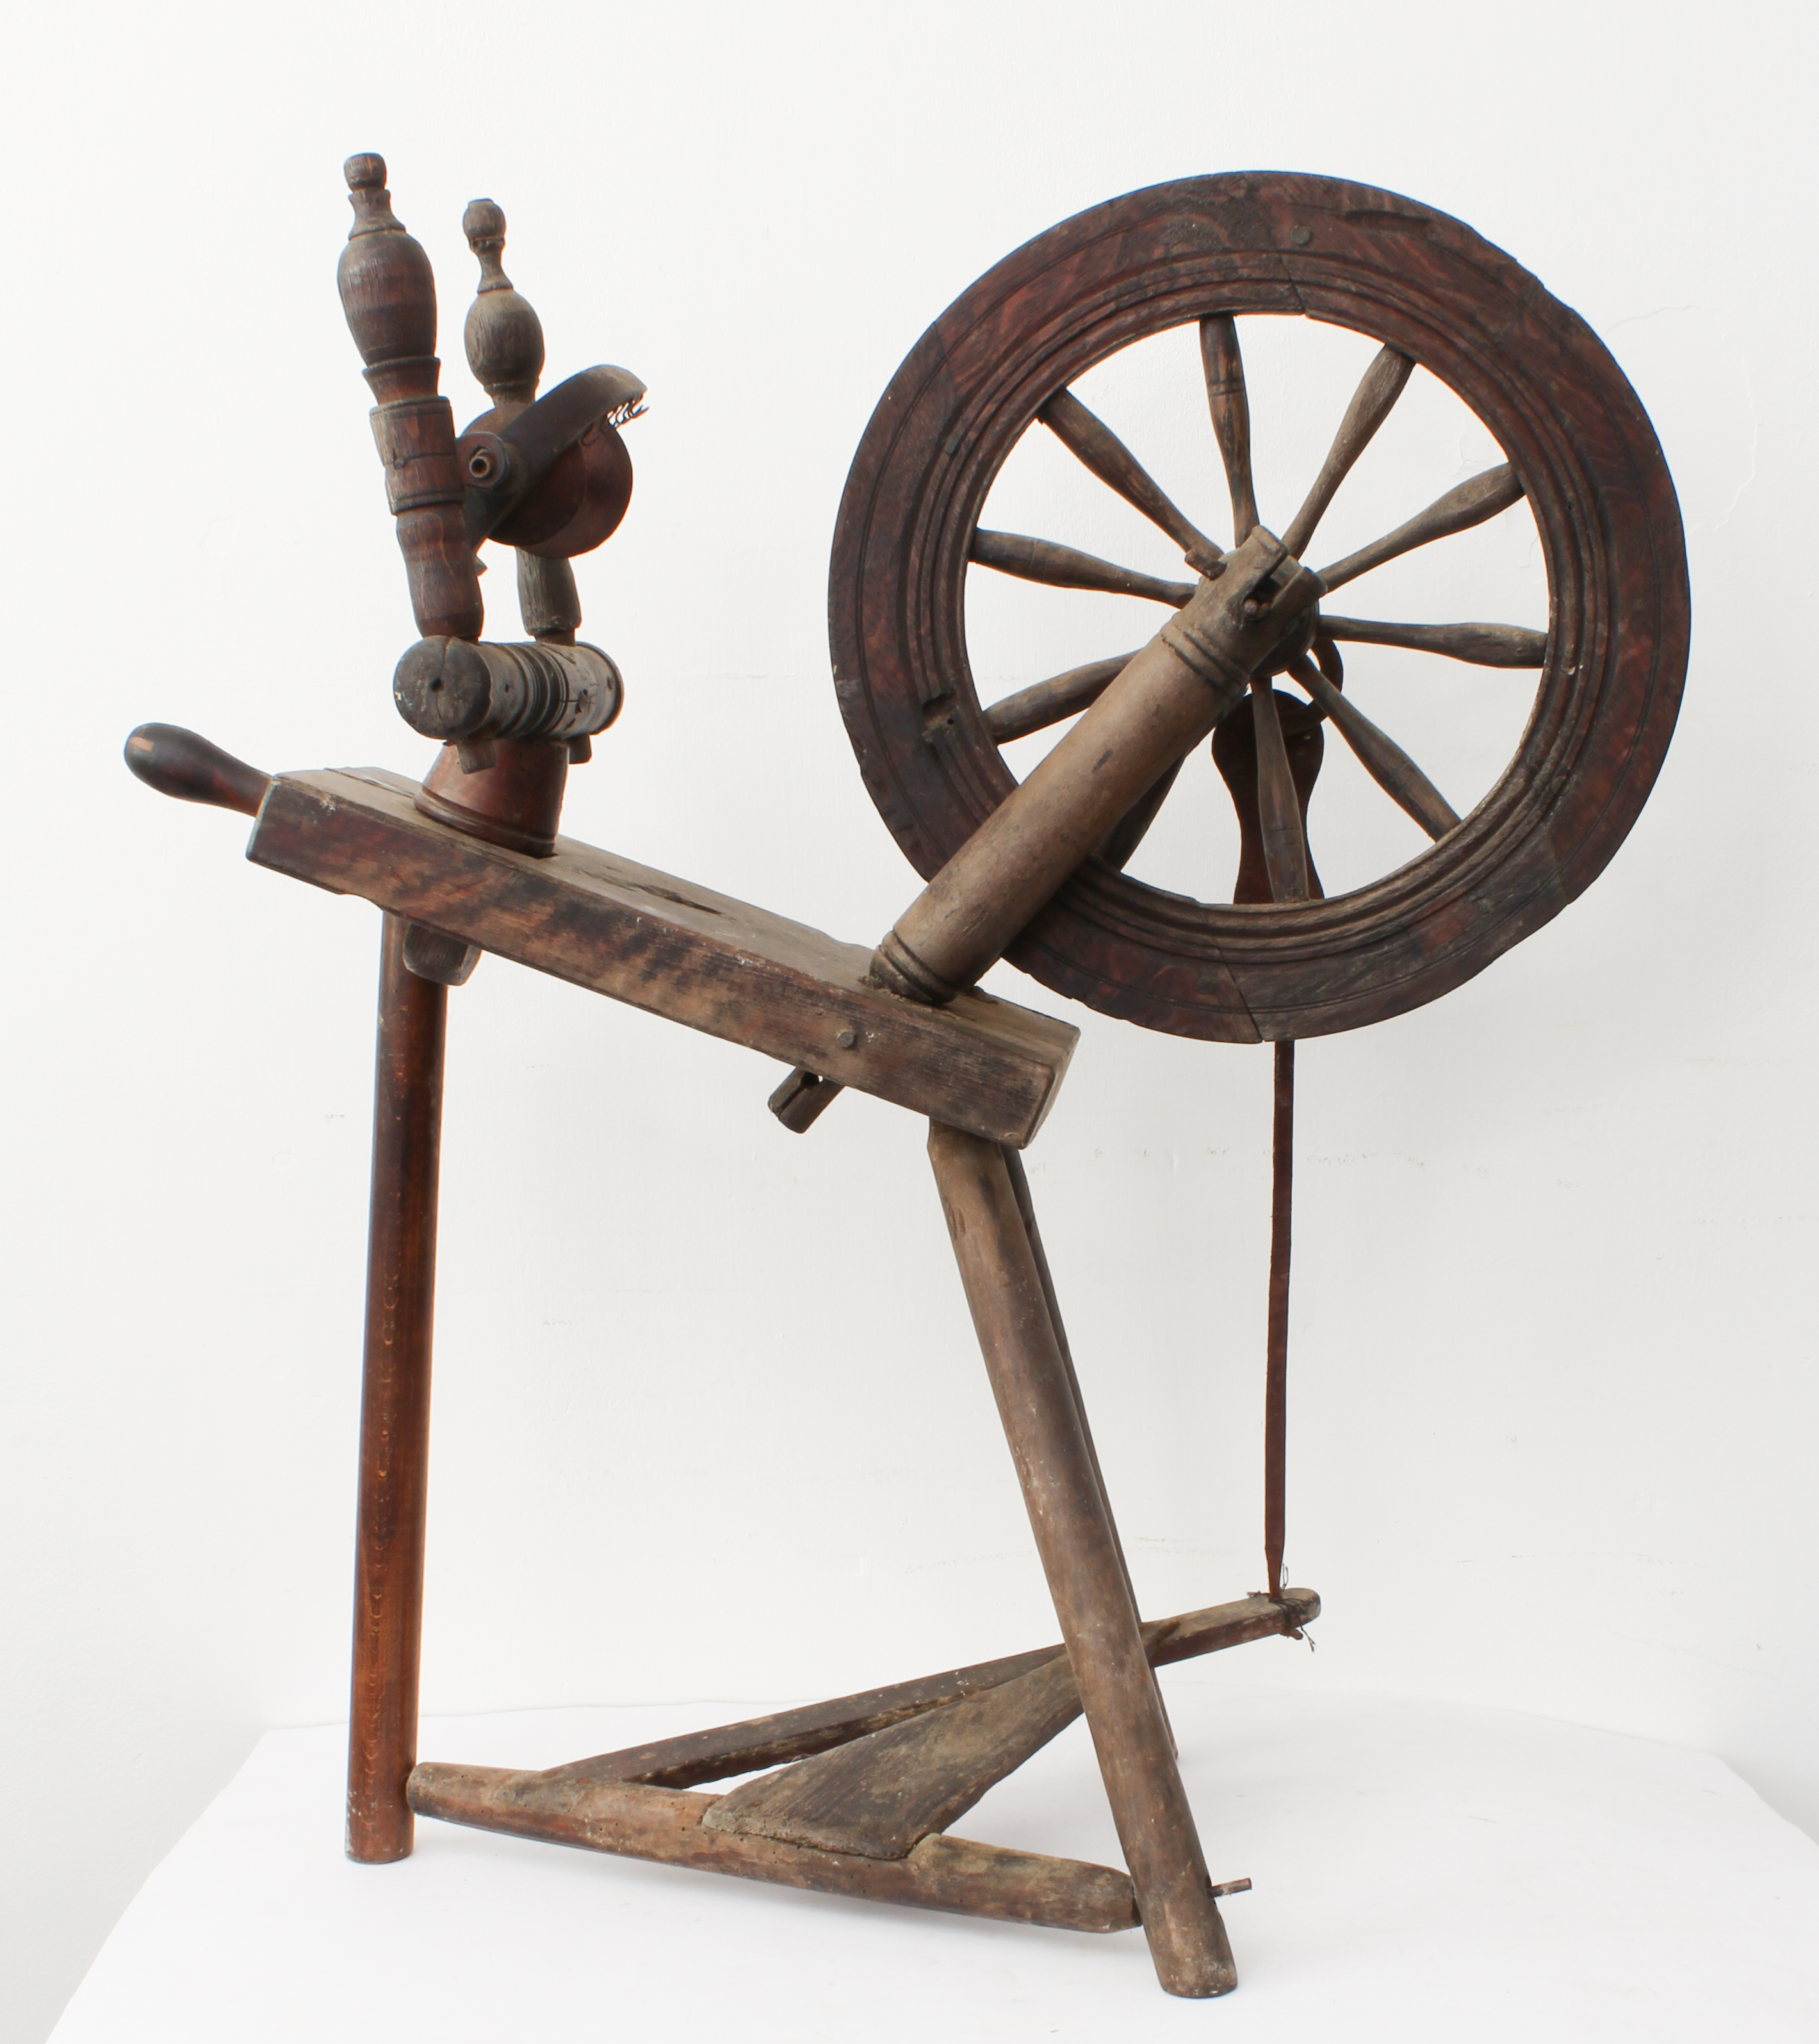 Two antique spinning wheels - some missing parts. - Image 5 of 5